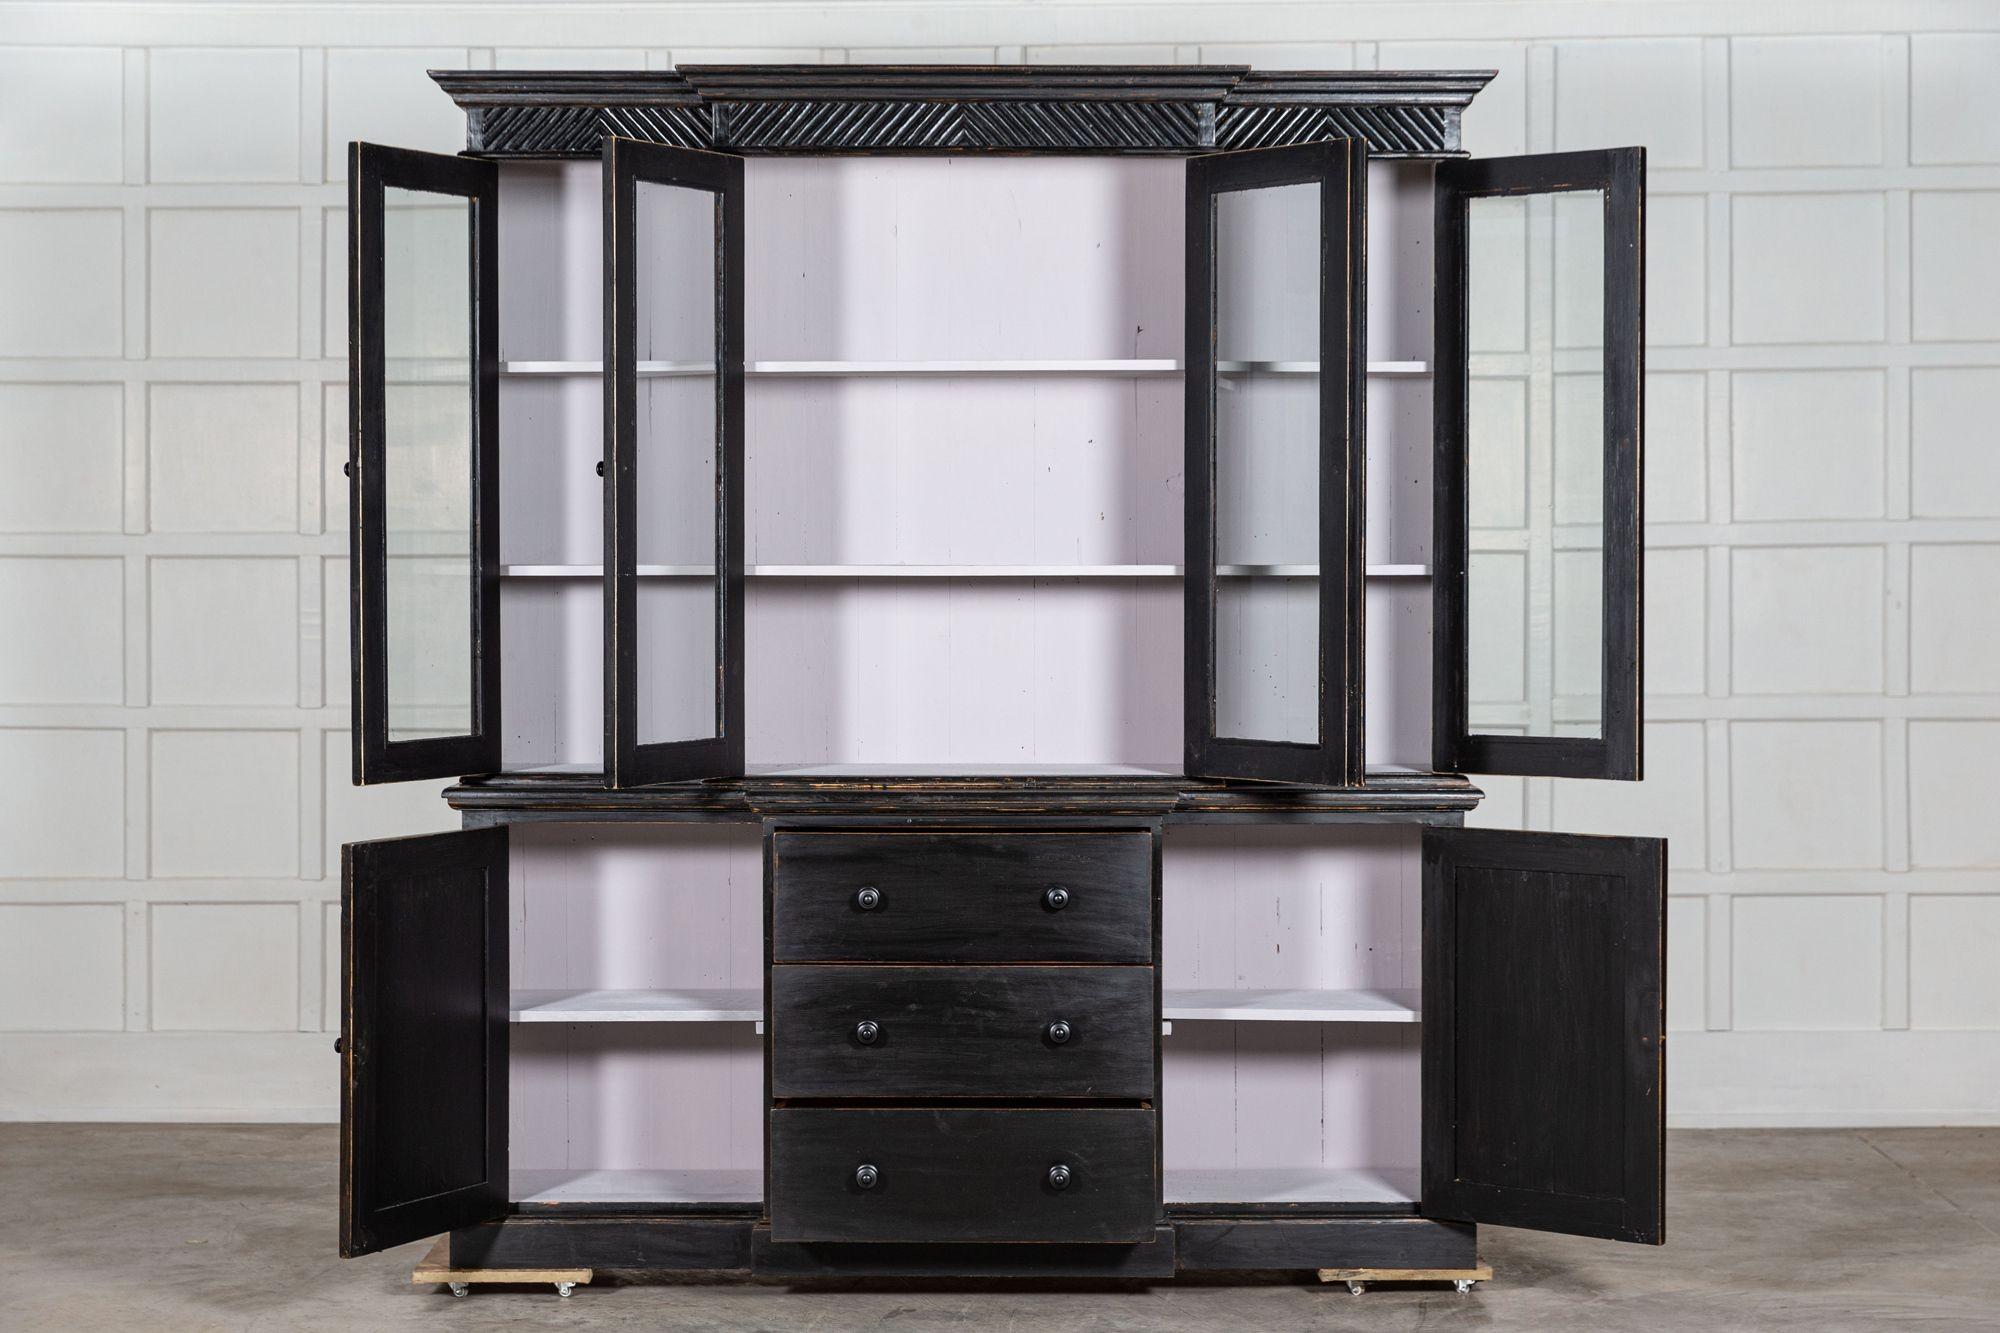 circa Mid-20thC
Large English Ebonised glazed pine breakfront bookcase cabinet
We can also customise existing pieces to suit your scheme/requirements. We have our own workshop, restorers and finishers. From adapting to finishing pieces including,